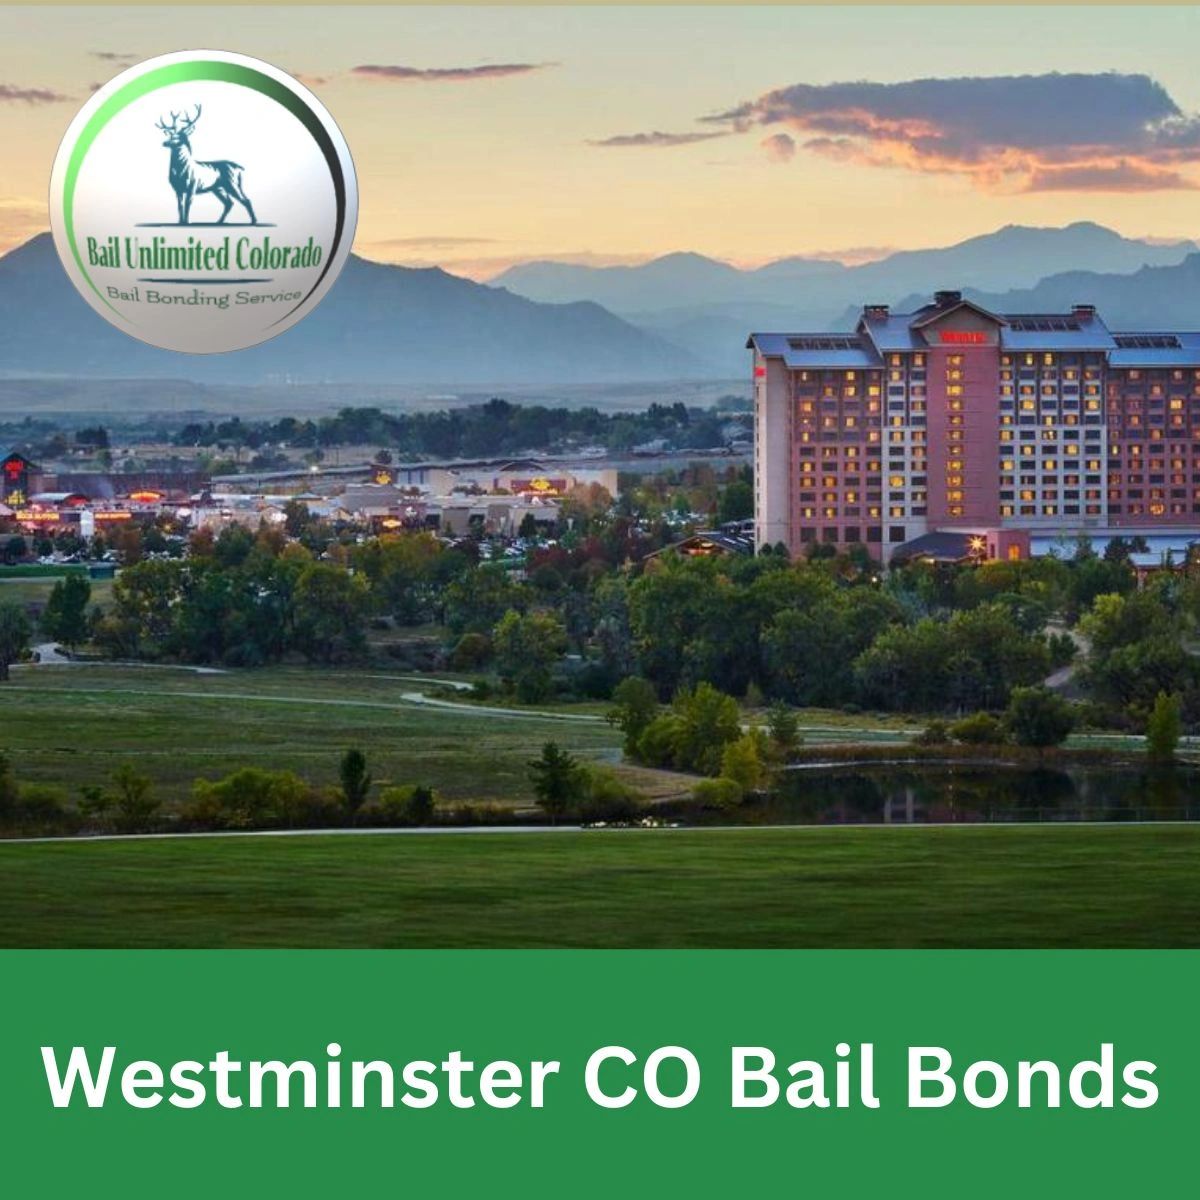 Westminster CO Bail Bonds IMAGE Westminster municipality 39.83665, -105.0372 LOGO Bail Unlimited CO